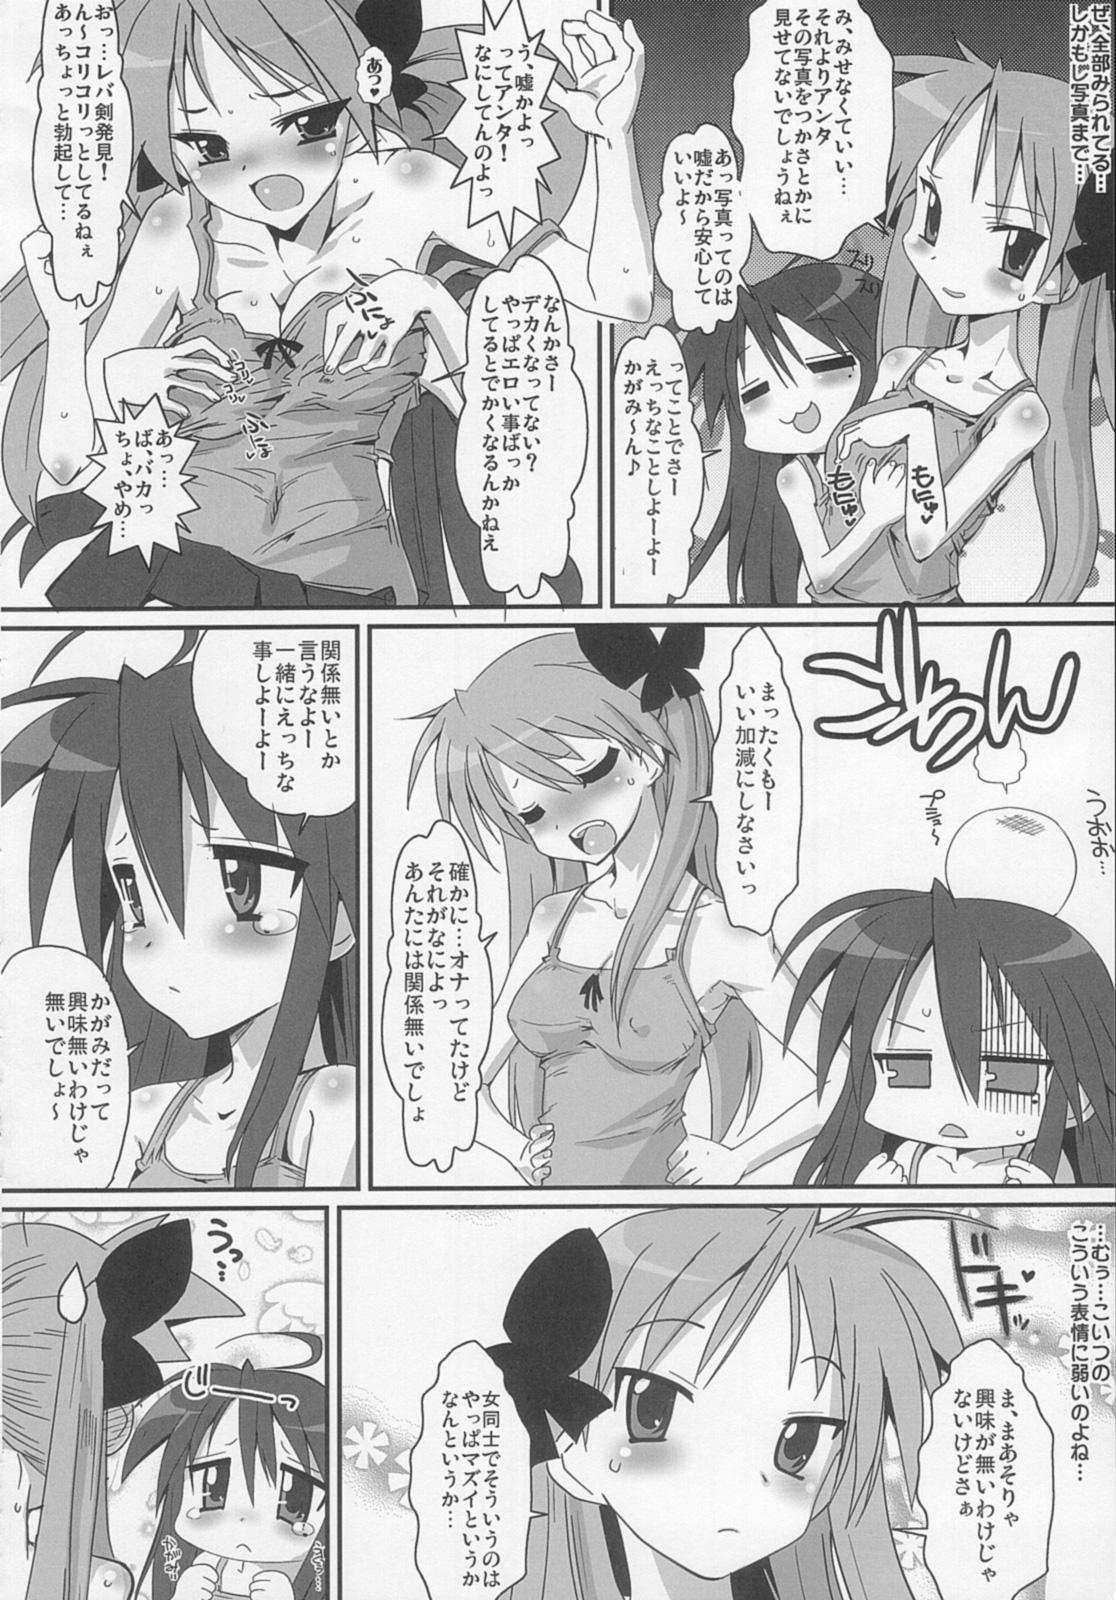 Freak Ai dayo Kagamin - Lucky star Desperate - Page 7